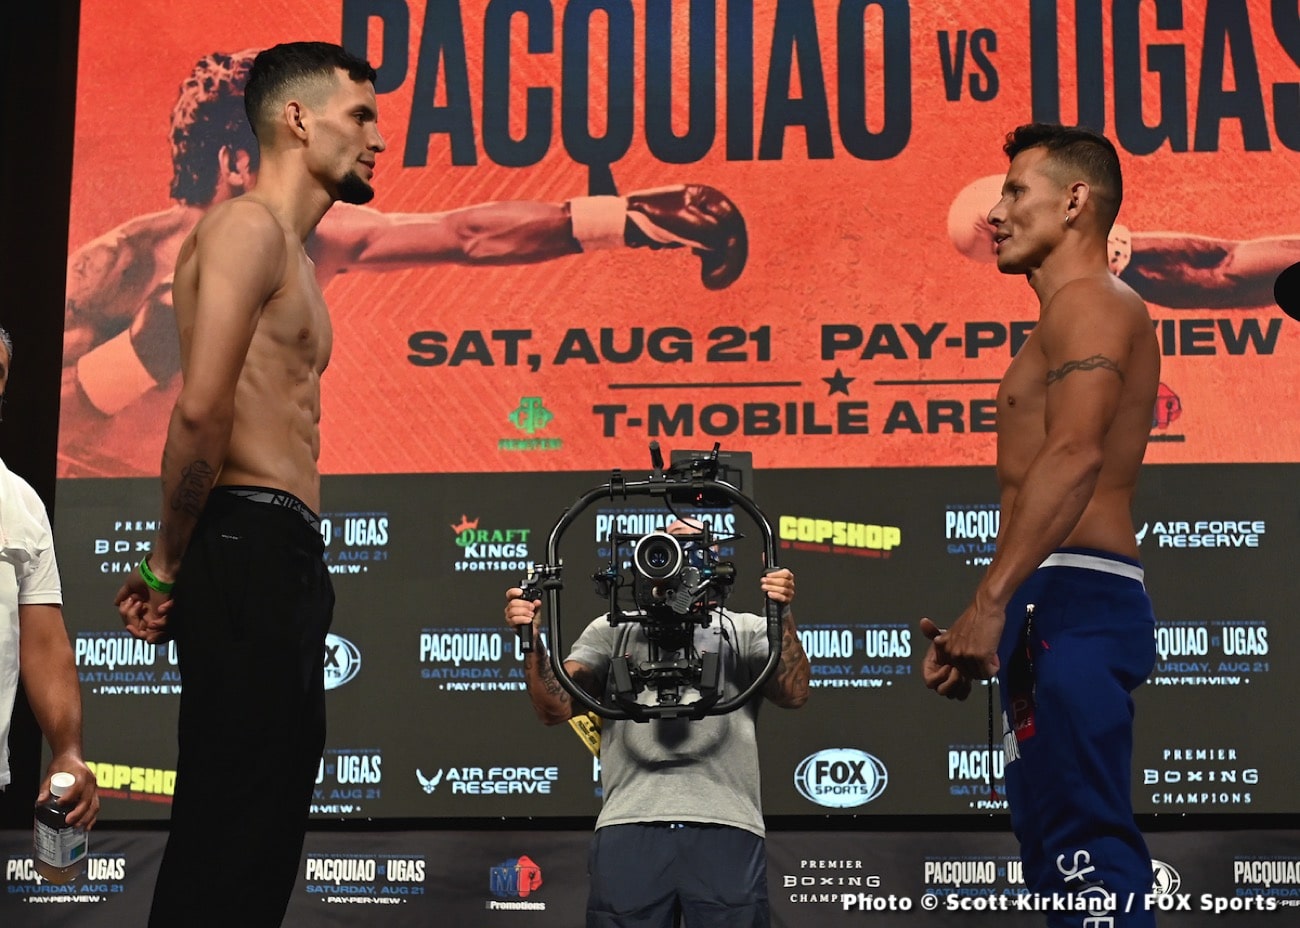 Image: Manny Pacquiao 146 vs. Yordenis Ugas - 147 - weigh-in results